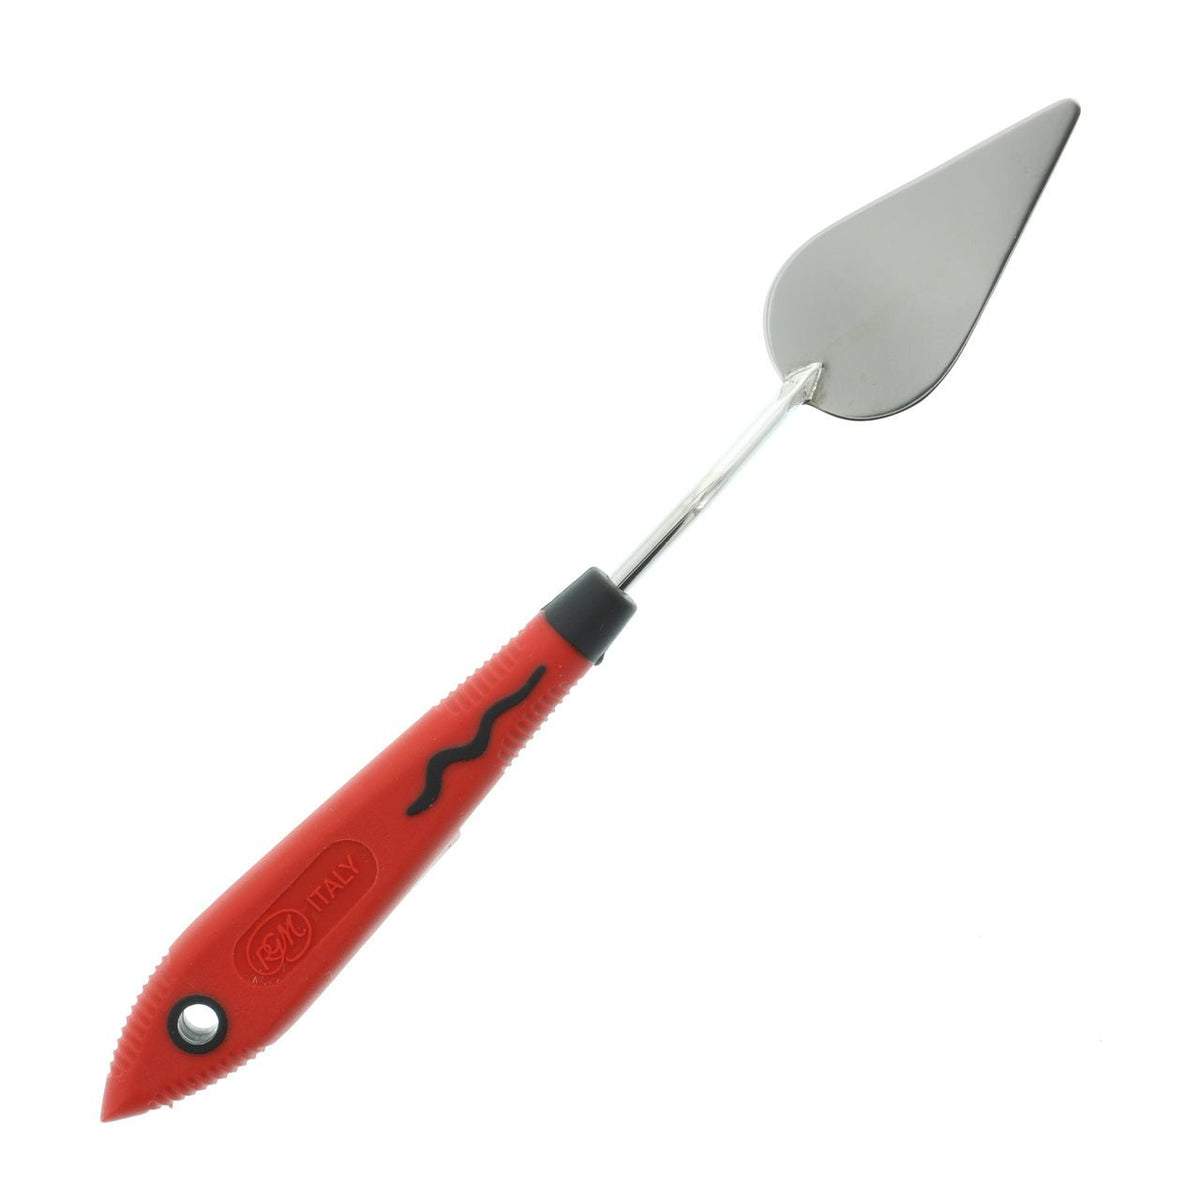 RGM Soft Grip Painting Knife #031 (Red Handle) - merriartist.com